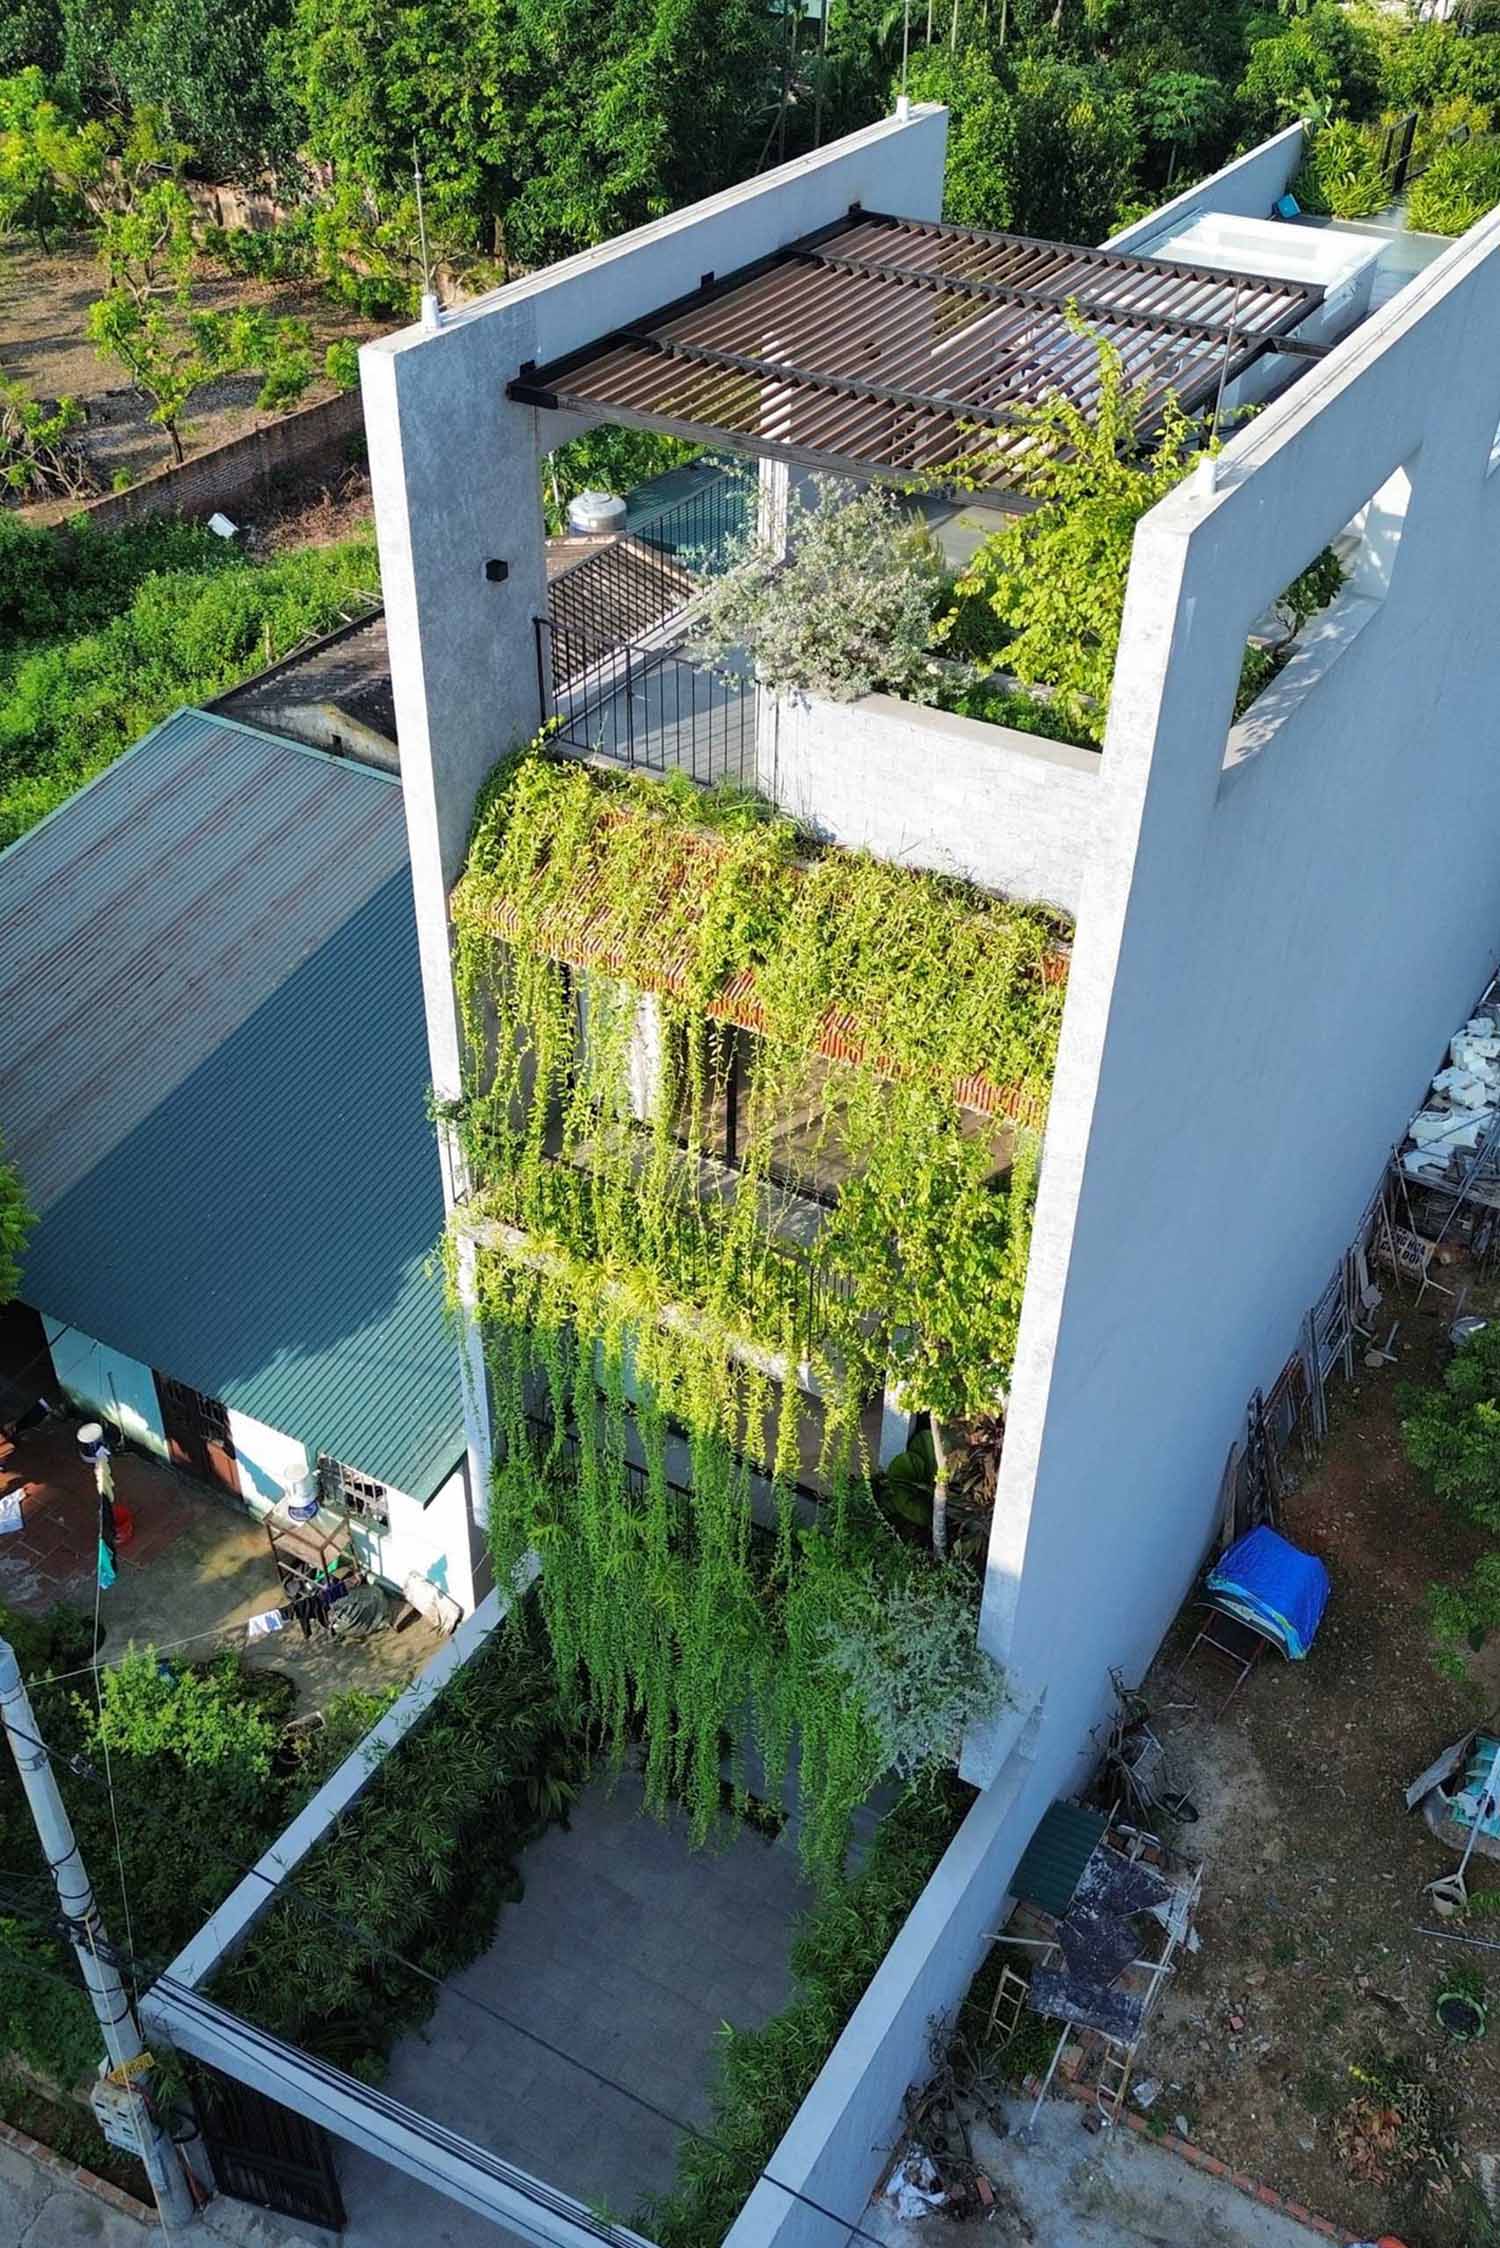 To integrate nature into the design of this modern home, Chrysanthemum curtains have been planted on the balconies, helping to soften the exterior and solve the problem of heat radiation, as well as the hot dry wind. The plants also assist in shielding the interior from the rain.